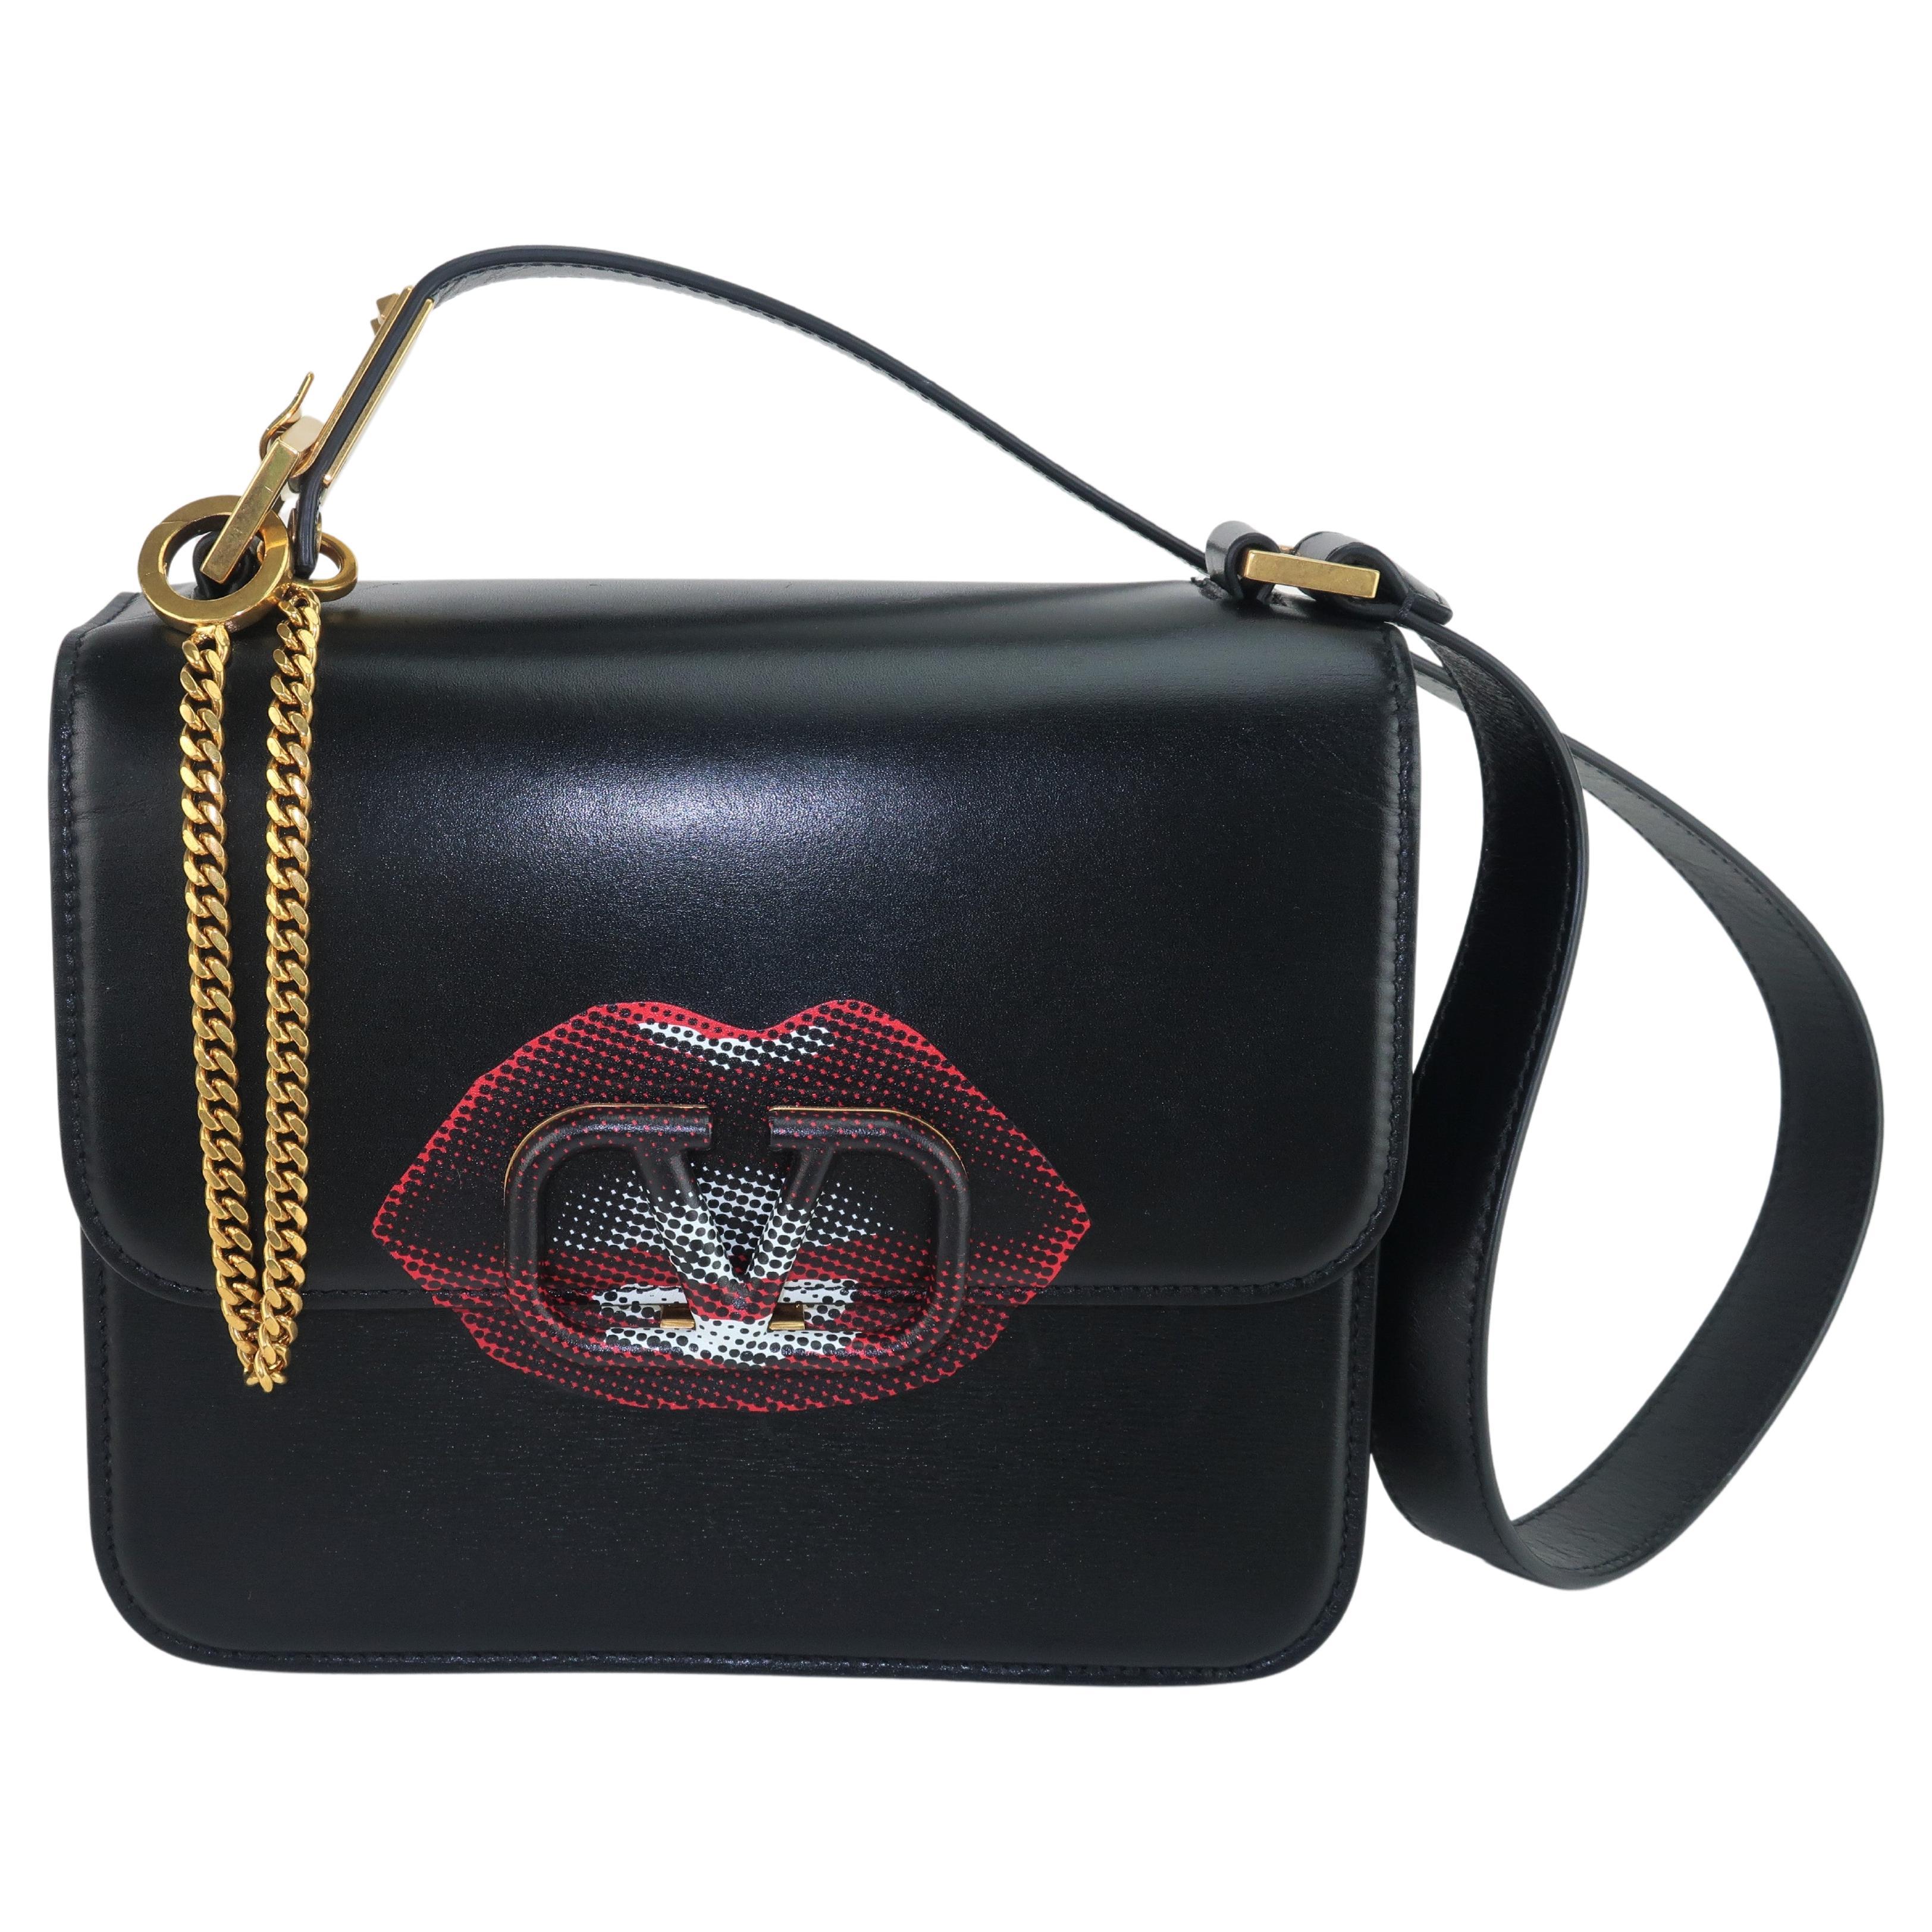 Fall 2019 V-Sling black leather handbag from the creative collaboration of Jun Takahashi, famed Japanese streetwear designer, and Valentino ... a design house synonymous with Italian luxury.  This fabulous and functional bag is a wonderful